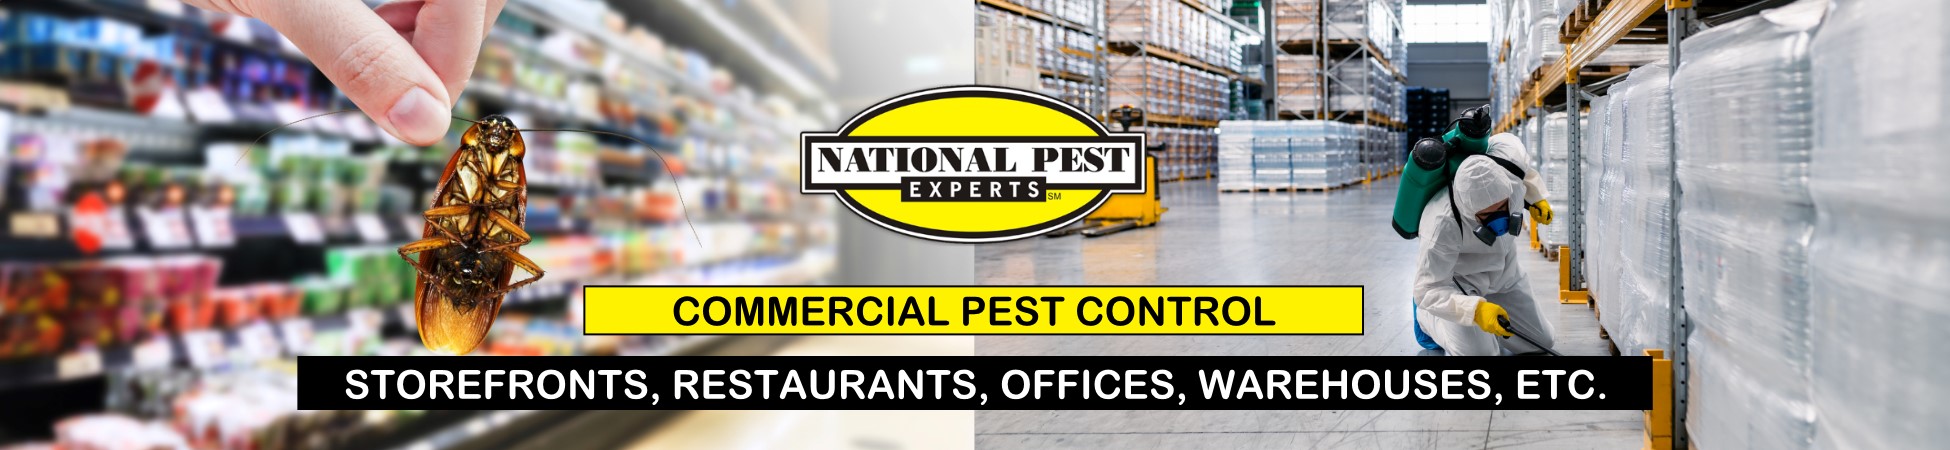 National Pest Experts - Commercial & Industrial exterminating and pest control in Halesite, NY